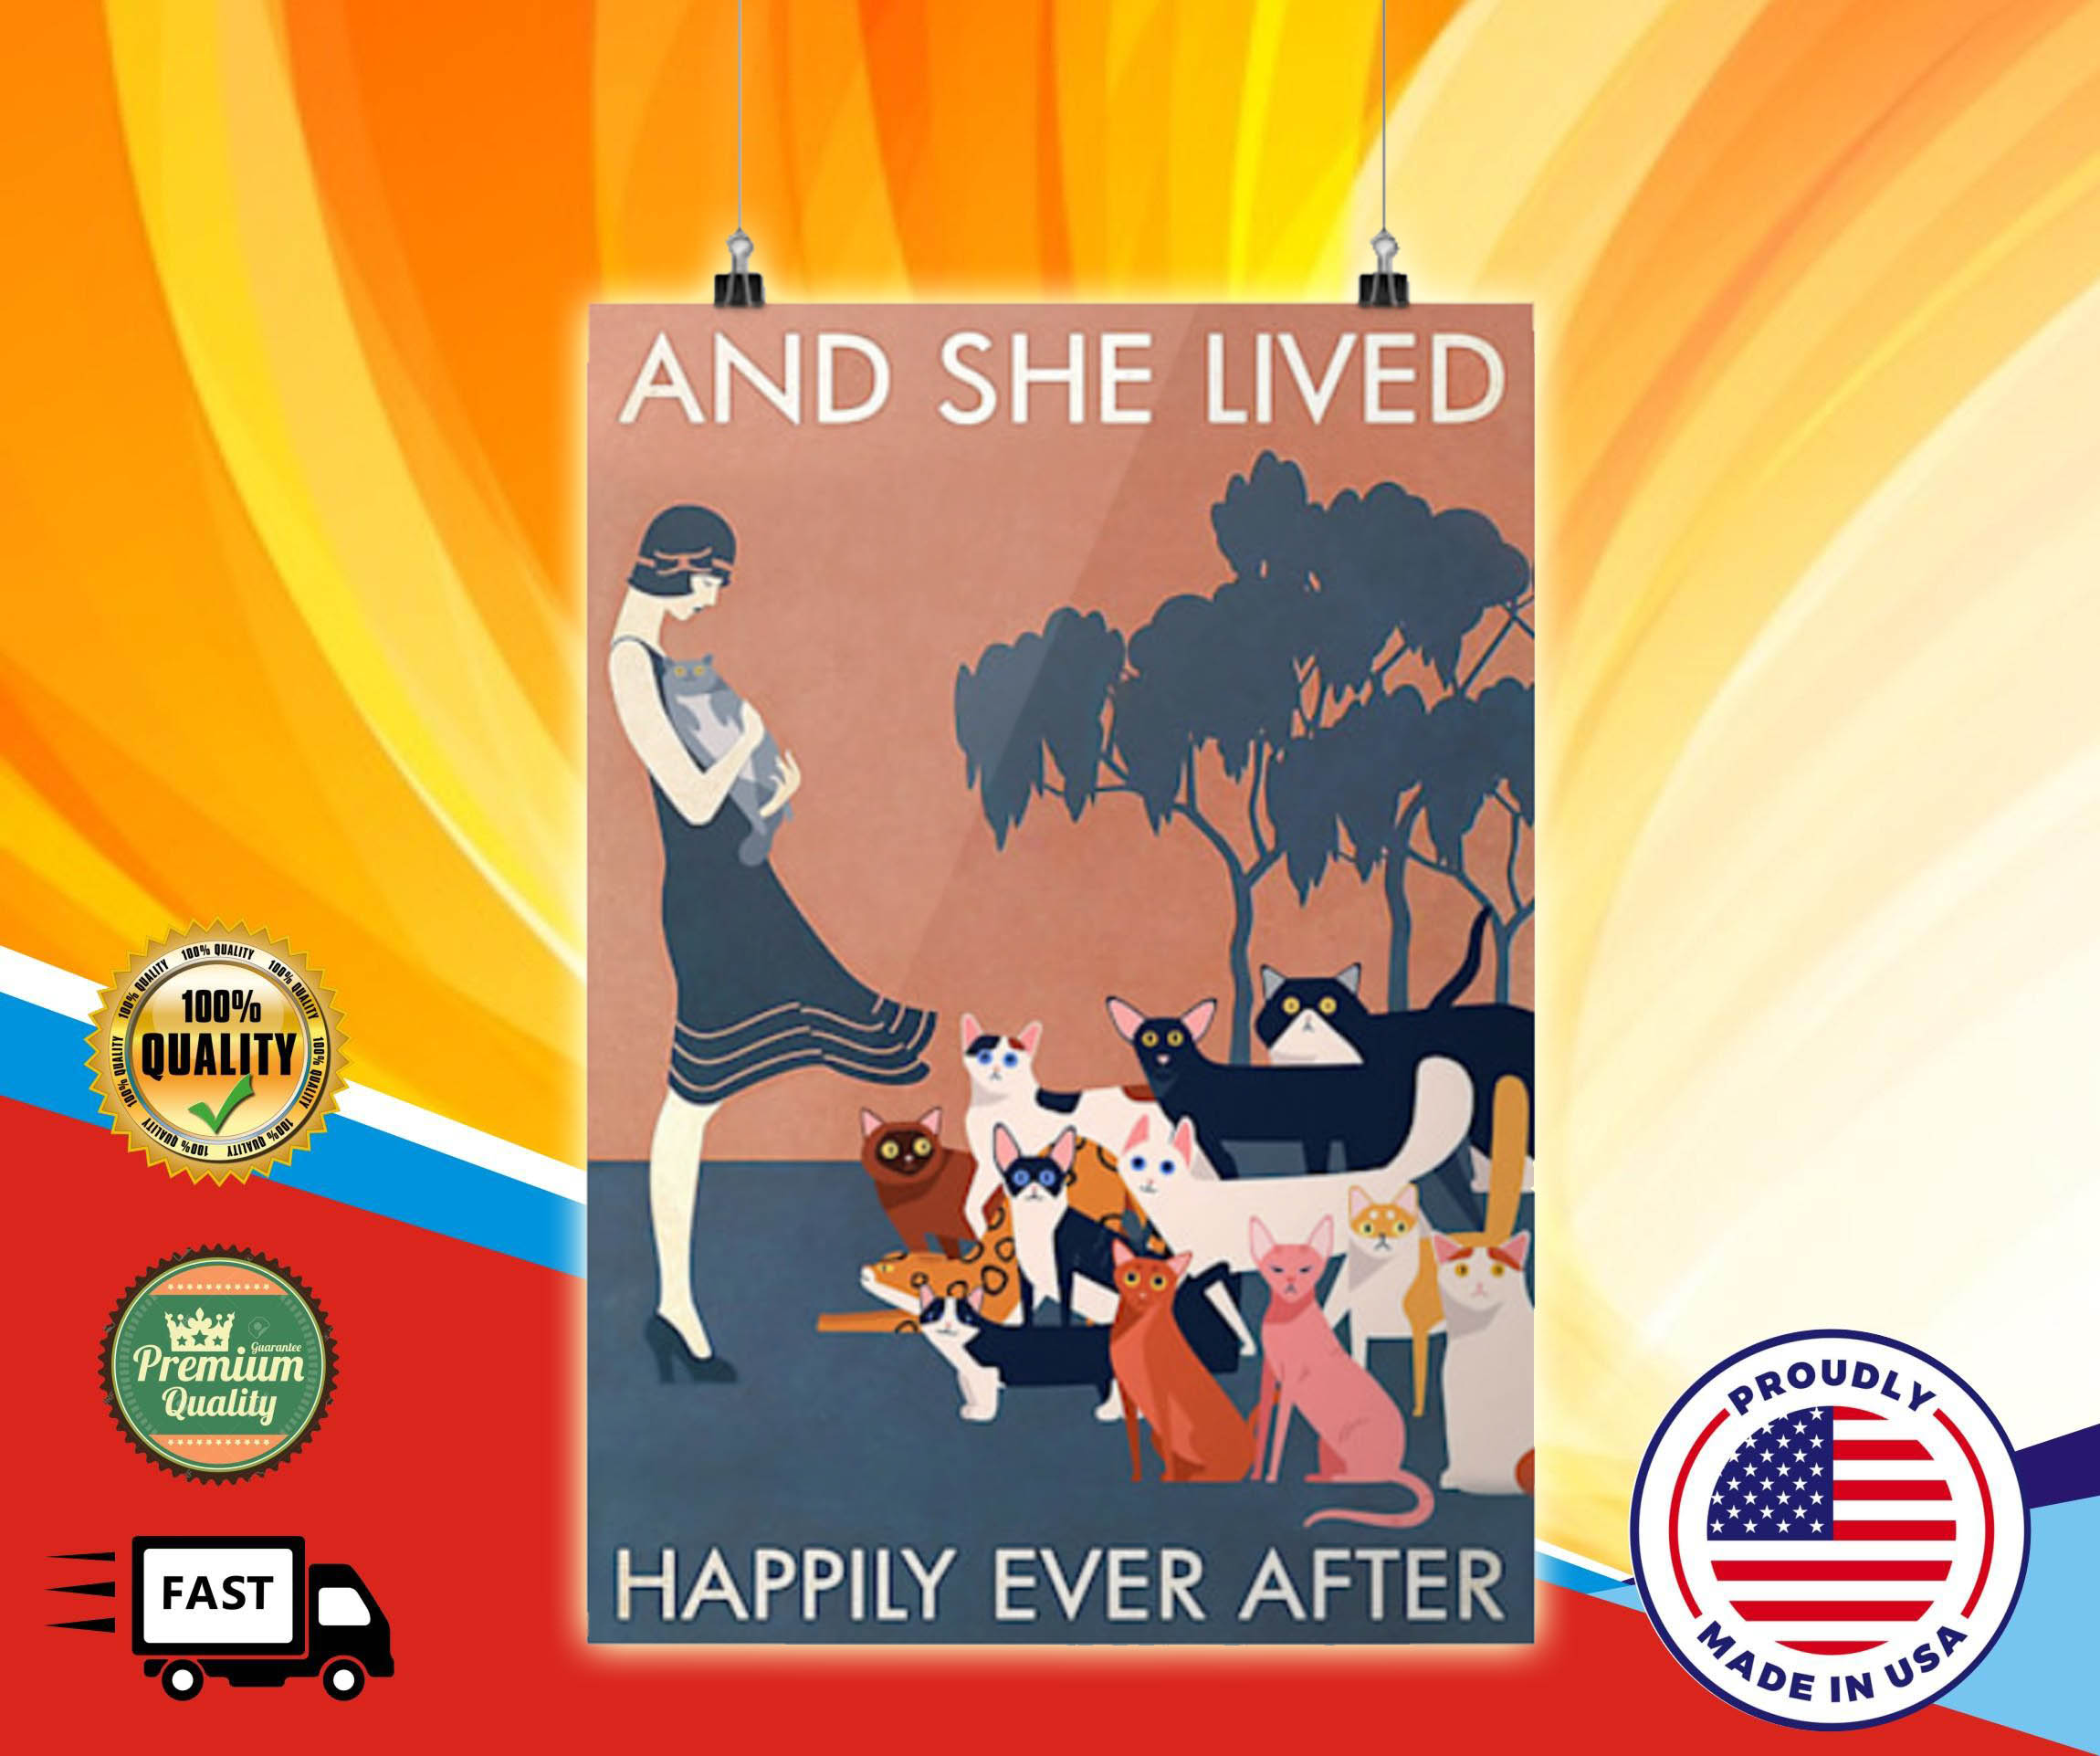 Cat and she lived happily ever after poster 4